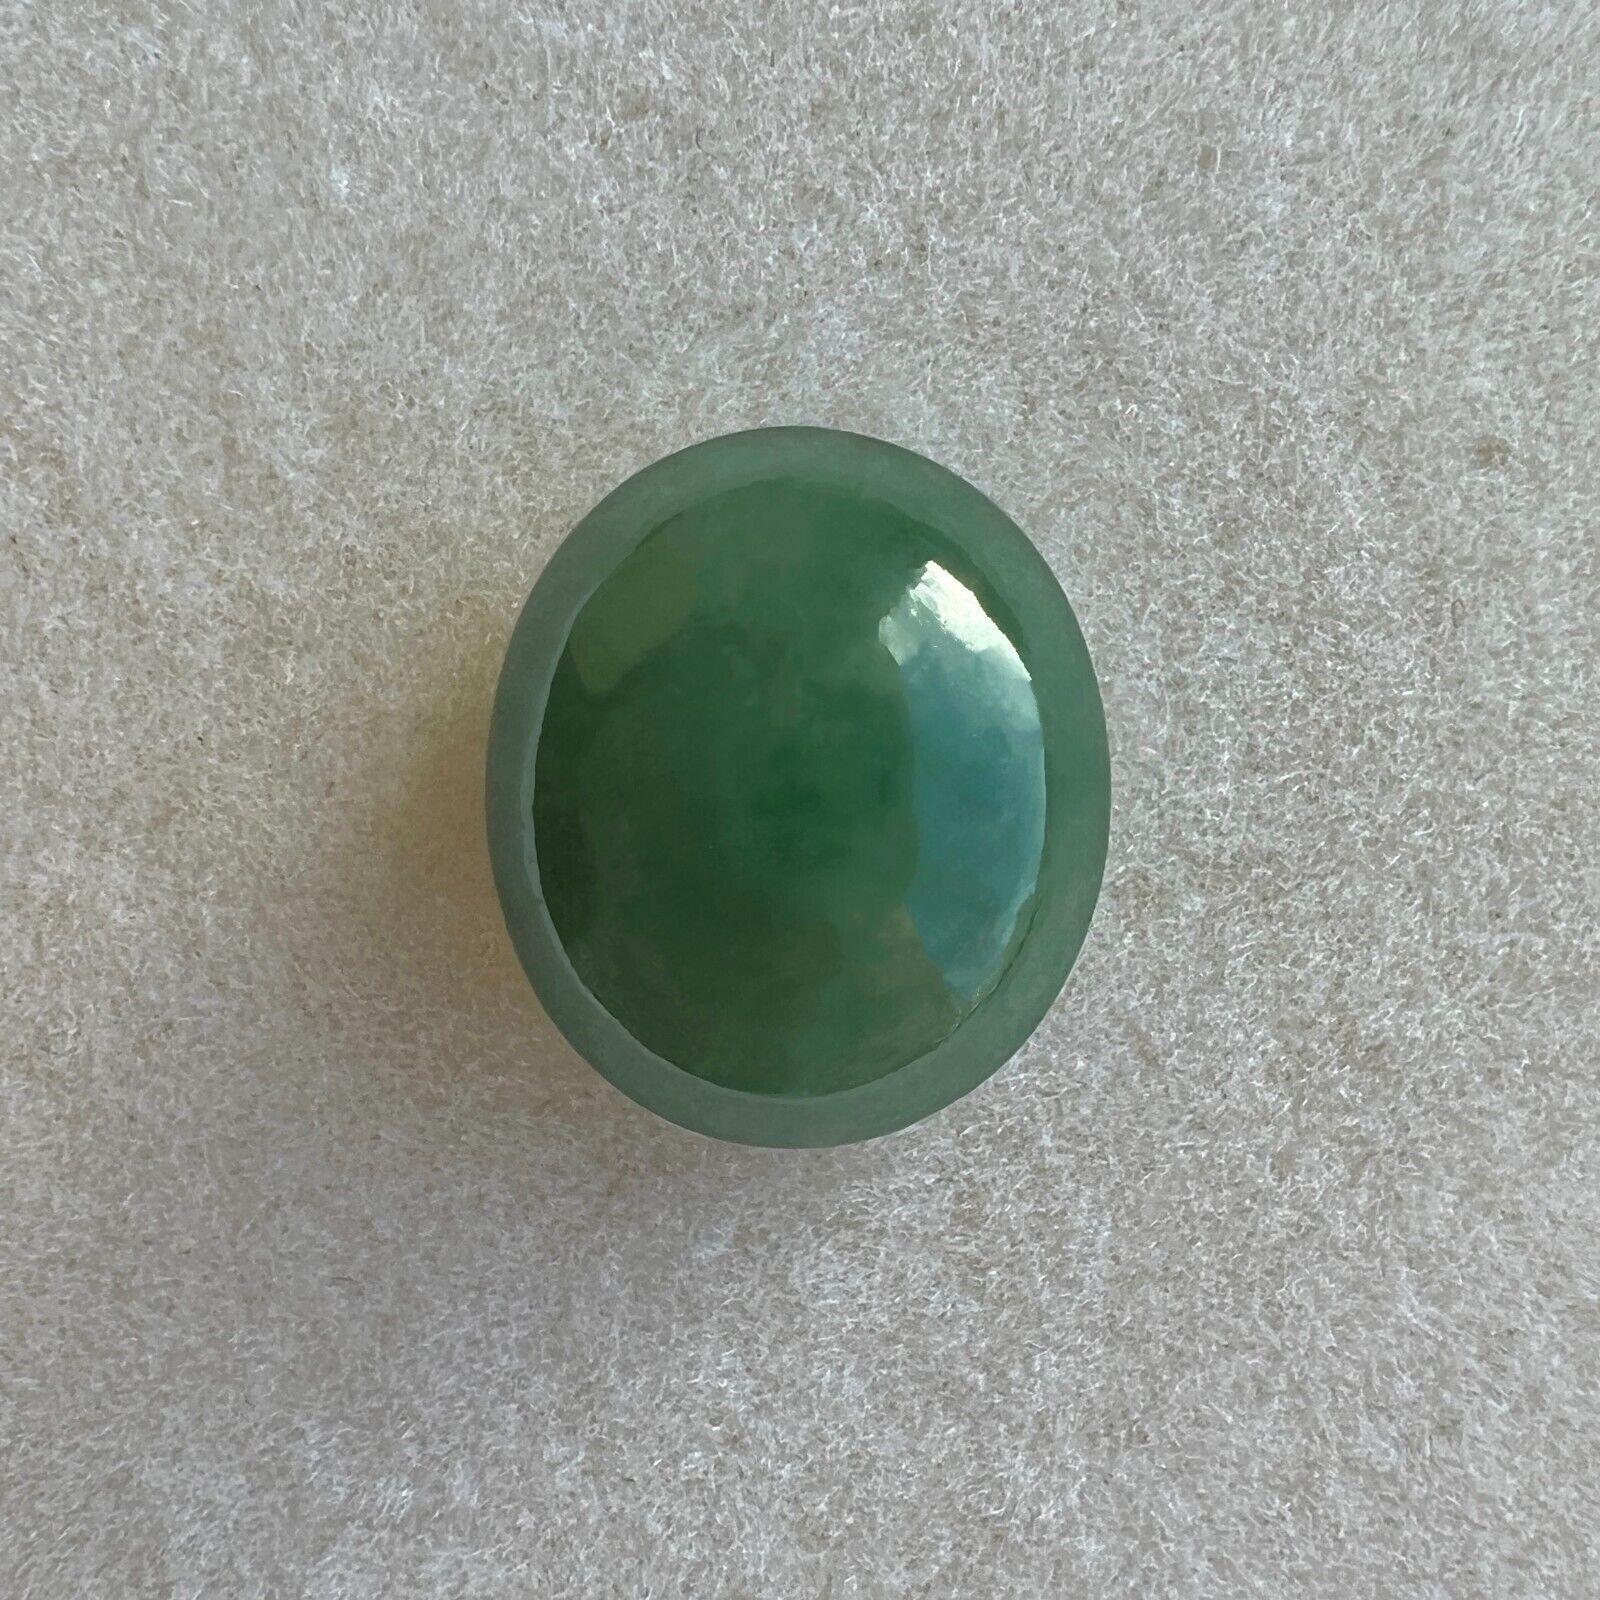 IGI Certified 6.67Ct Natural Green Jadeite Jade ‘A’ Grade Oval Cabochon Gem

IGI Certified Untreated A Grade Green Jadeite Gemstone.
Large 6.67 Carat with an excellent oval cabochon cut and bright green colour. Fully certified by IGI in